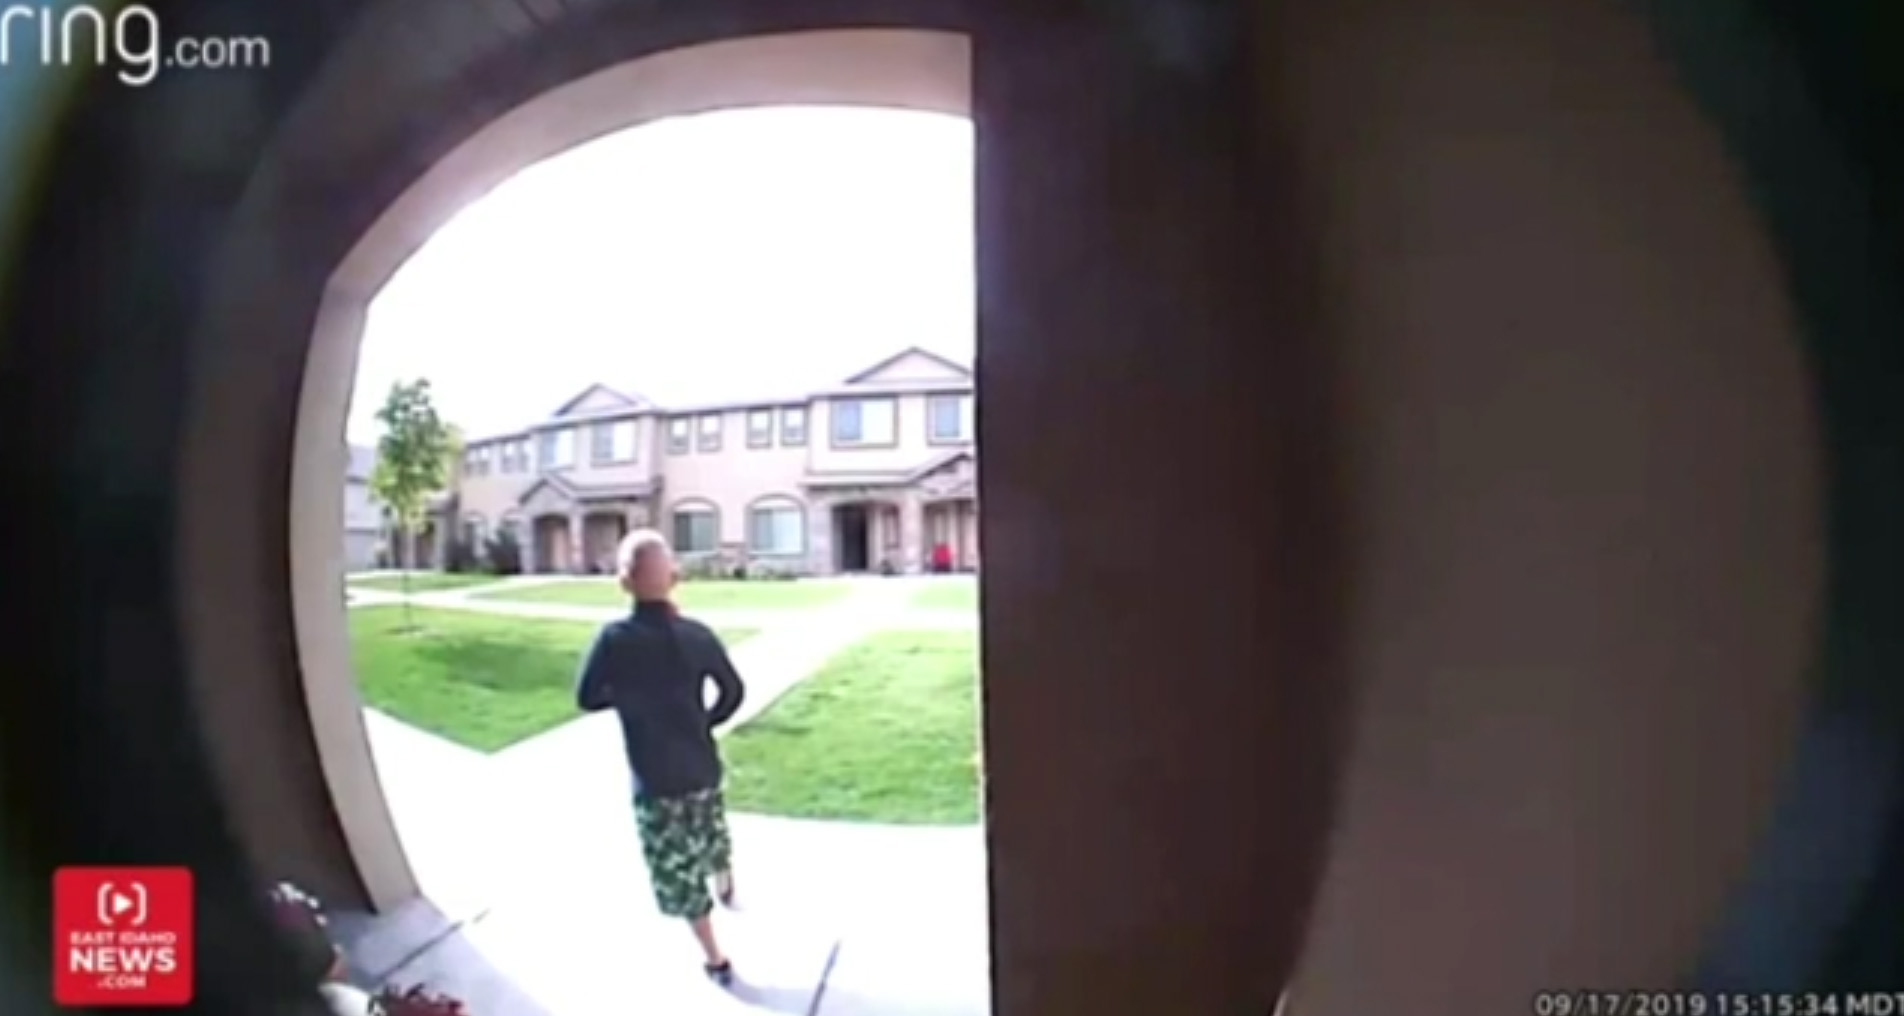 PHOTO: Police are using surveillance video to piece together a timeline of the disappearance of Joshua Vallow, 7, who is playing in the front yard of his Idaho home days before he and his 17-year-old sister, Tylee Ryan, went missing.